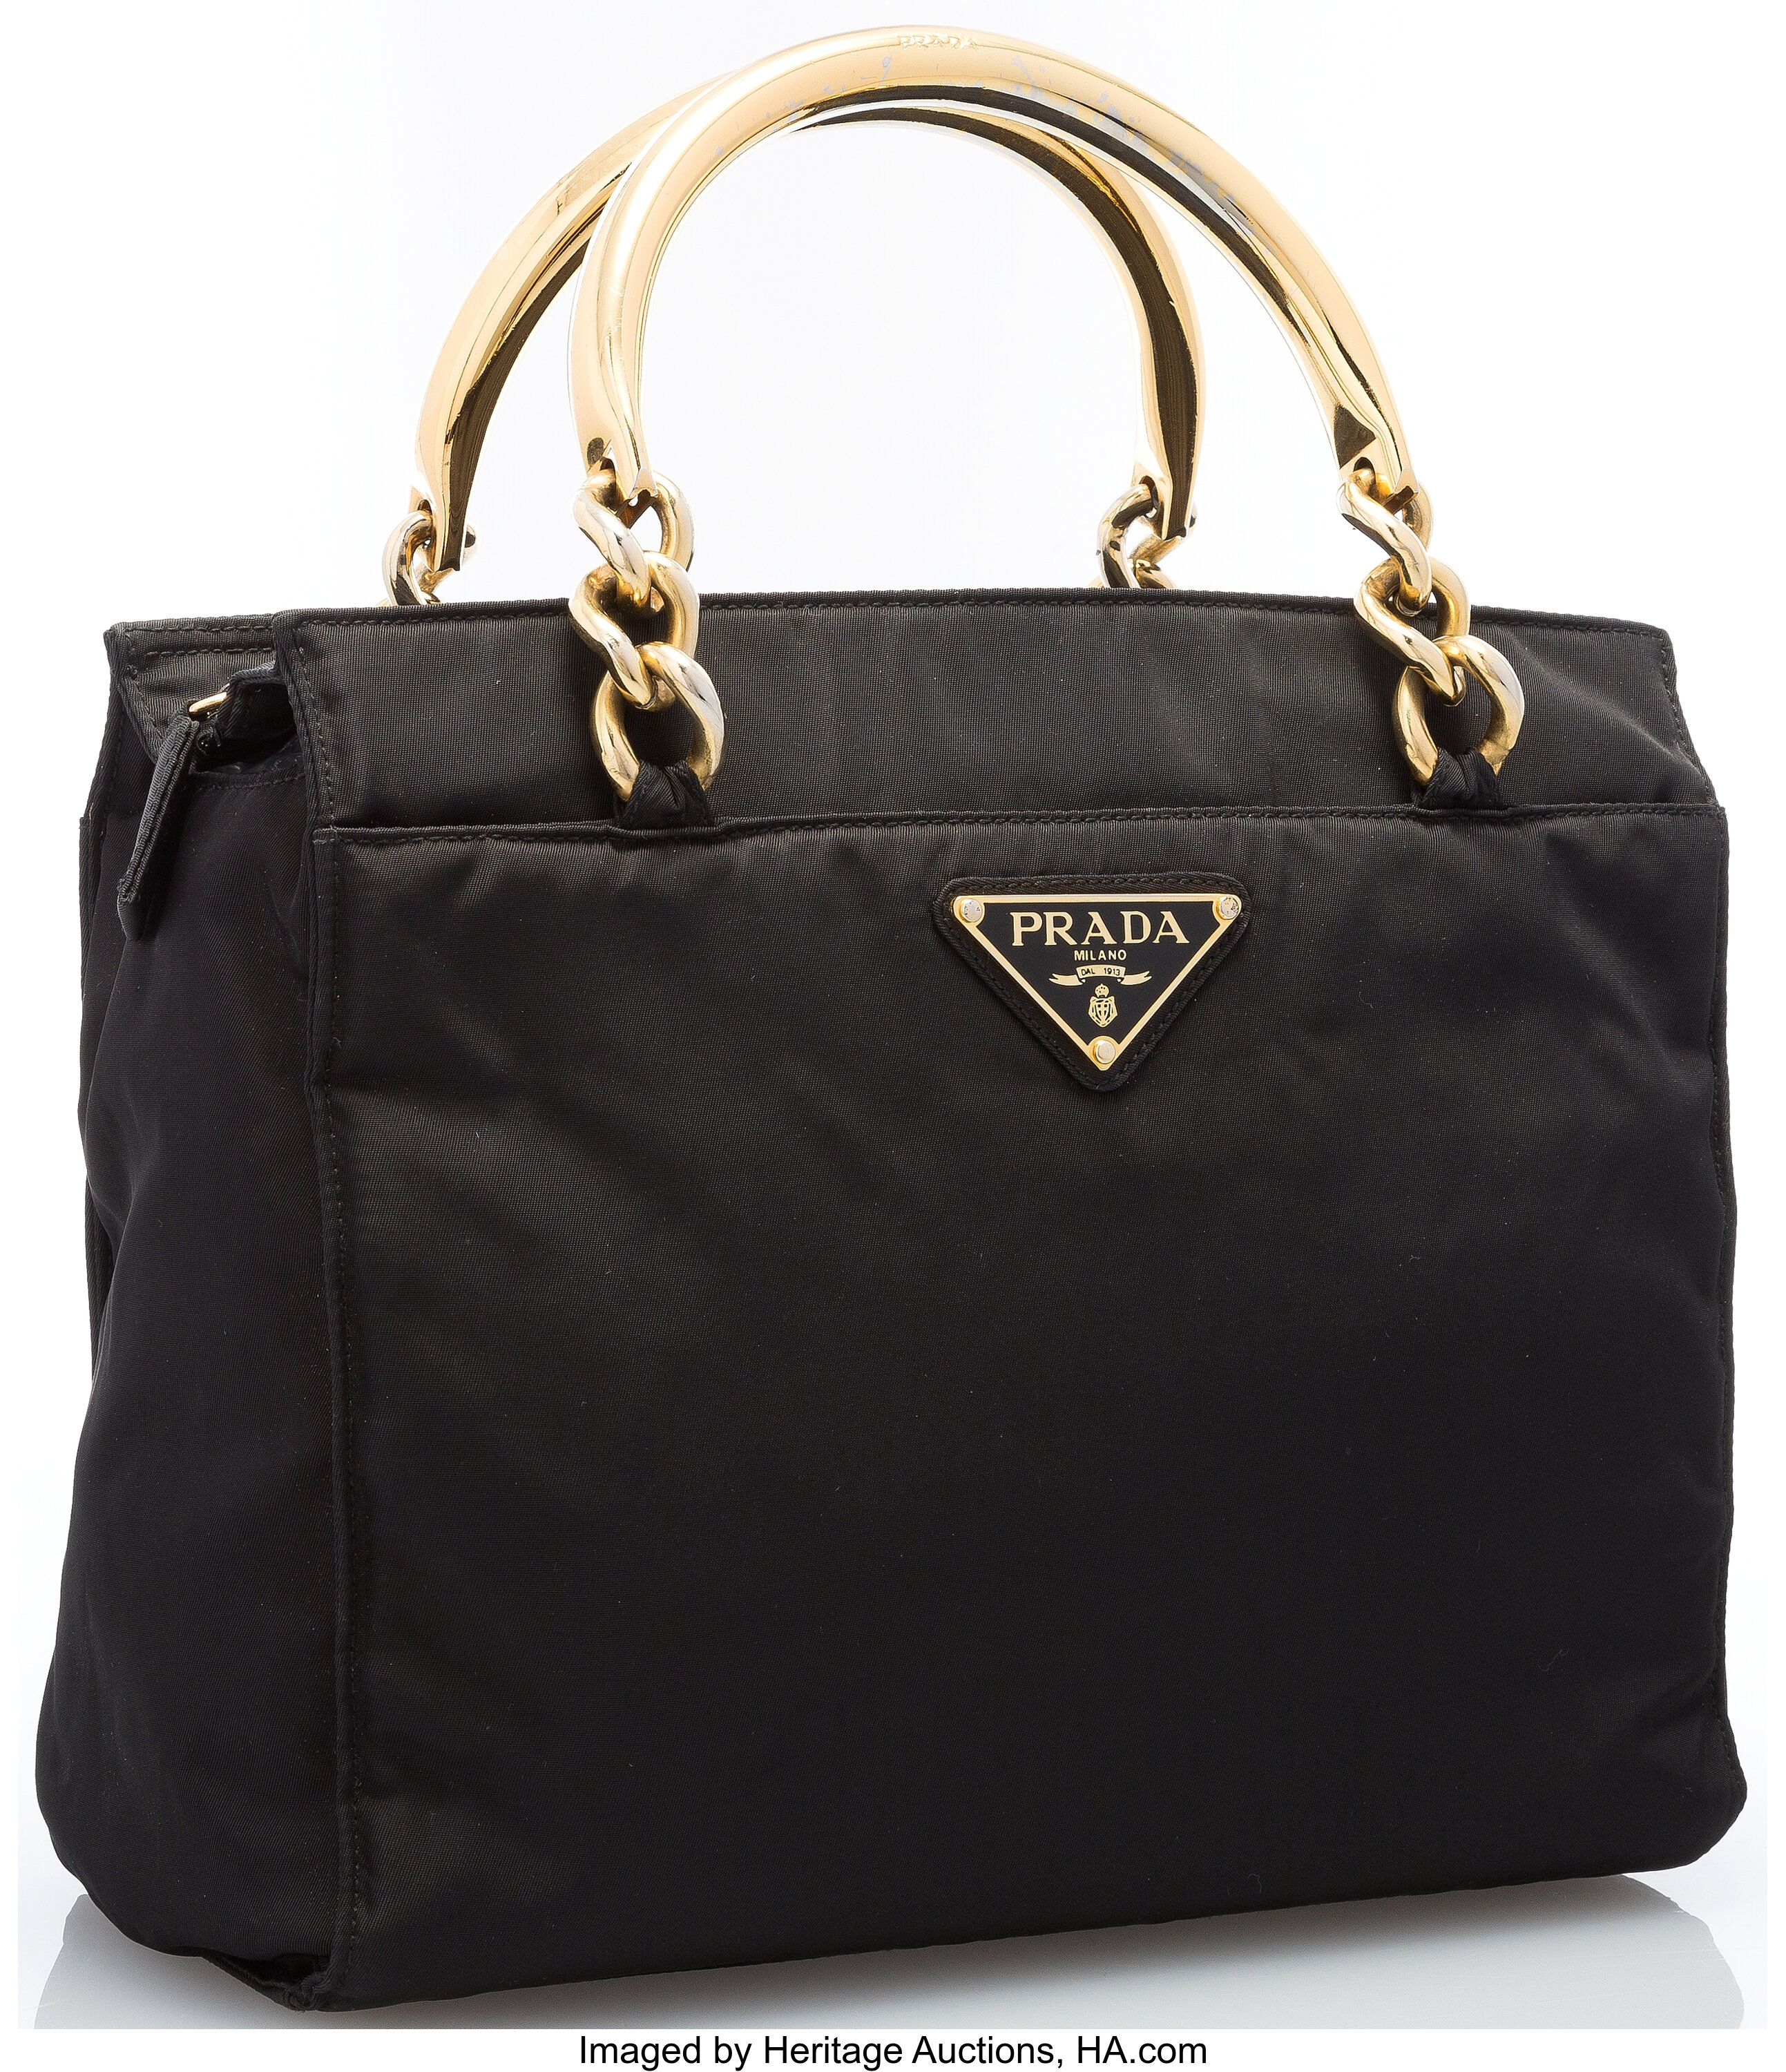 Prada Black Tessuto Canvas Tote Bag with Gold Chain Handles. Good | Lot  #20048 | Heritage Auctions